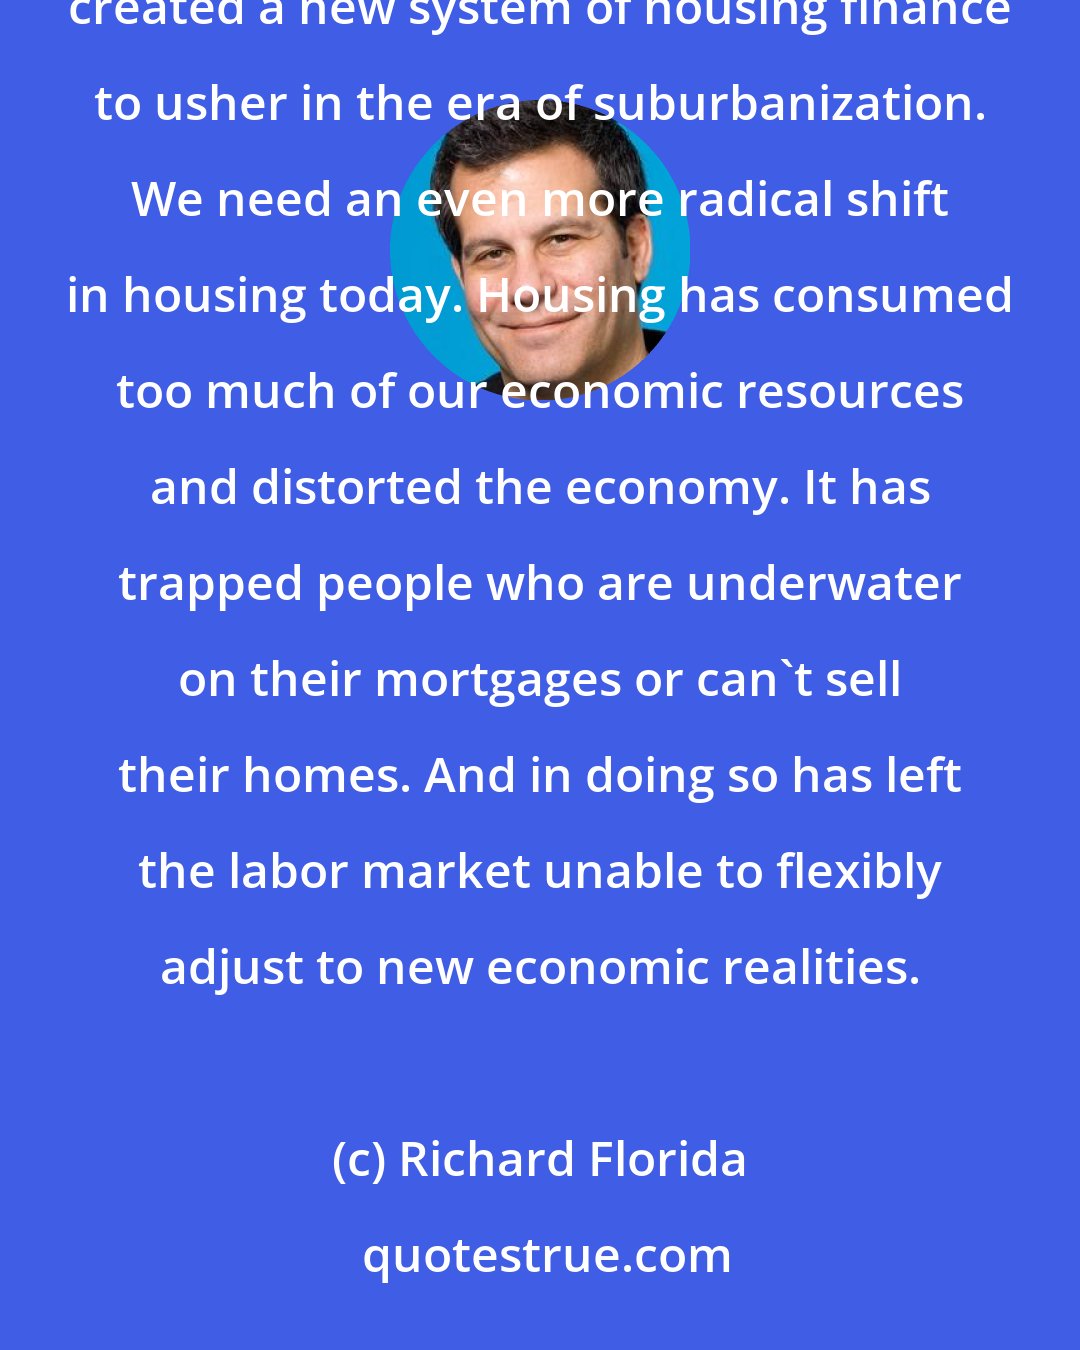 Richard Florida: Housing has always been a key to Great Resets. During the Great Depression and New Deal, the federal government created a new system of housing finance to usher in the era of suburbanization. We need an even more radical shift in housing today. Housing has consumed too much of our economic resources and distorted the economy. It has trapped people who are underwater on their mortgages or can't sell their homes. And in doing so has left the labor market unable to flexibly adjust to new economic realities.